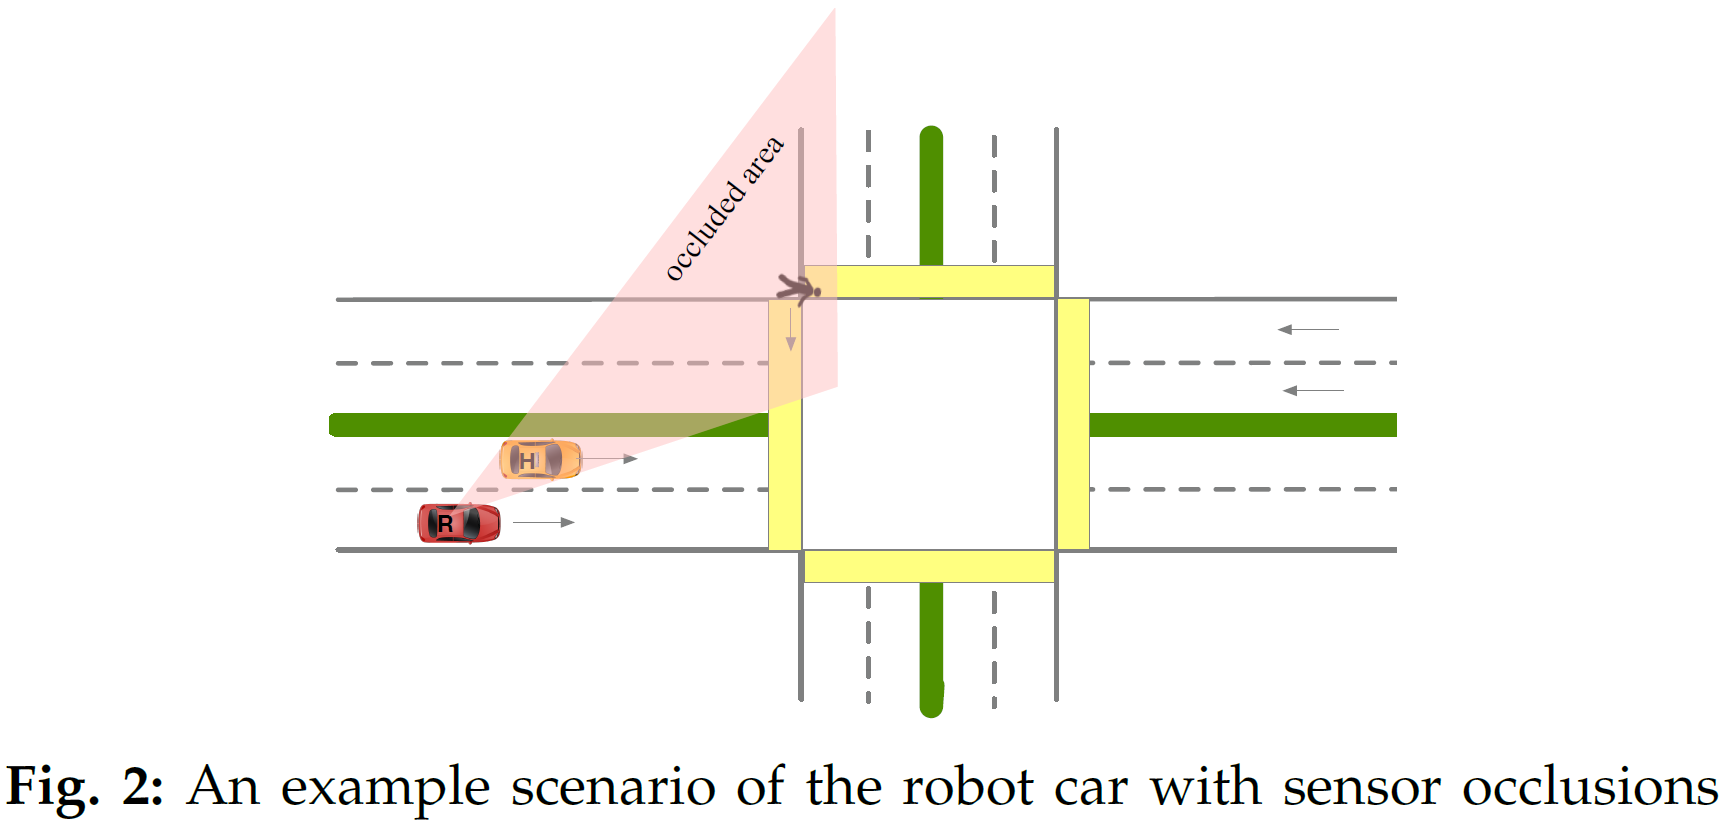 From the behaviour of the other driver, the ego car can infer and become more confident about the probability of a pedestrian crossing. Source: (Sun et al. 2019).